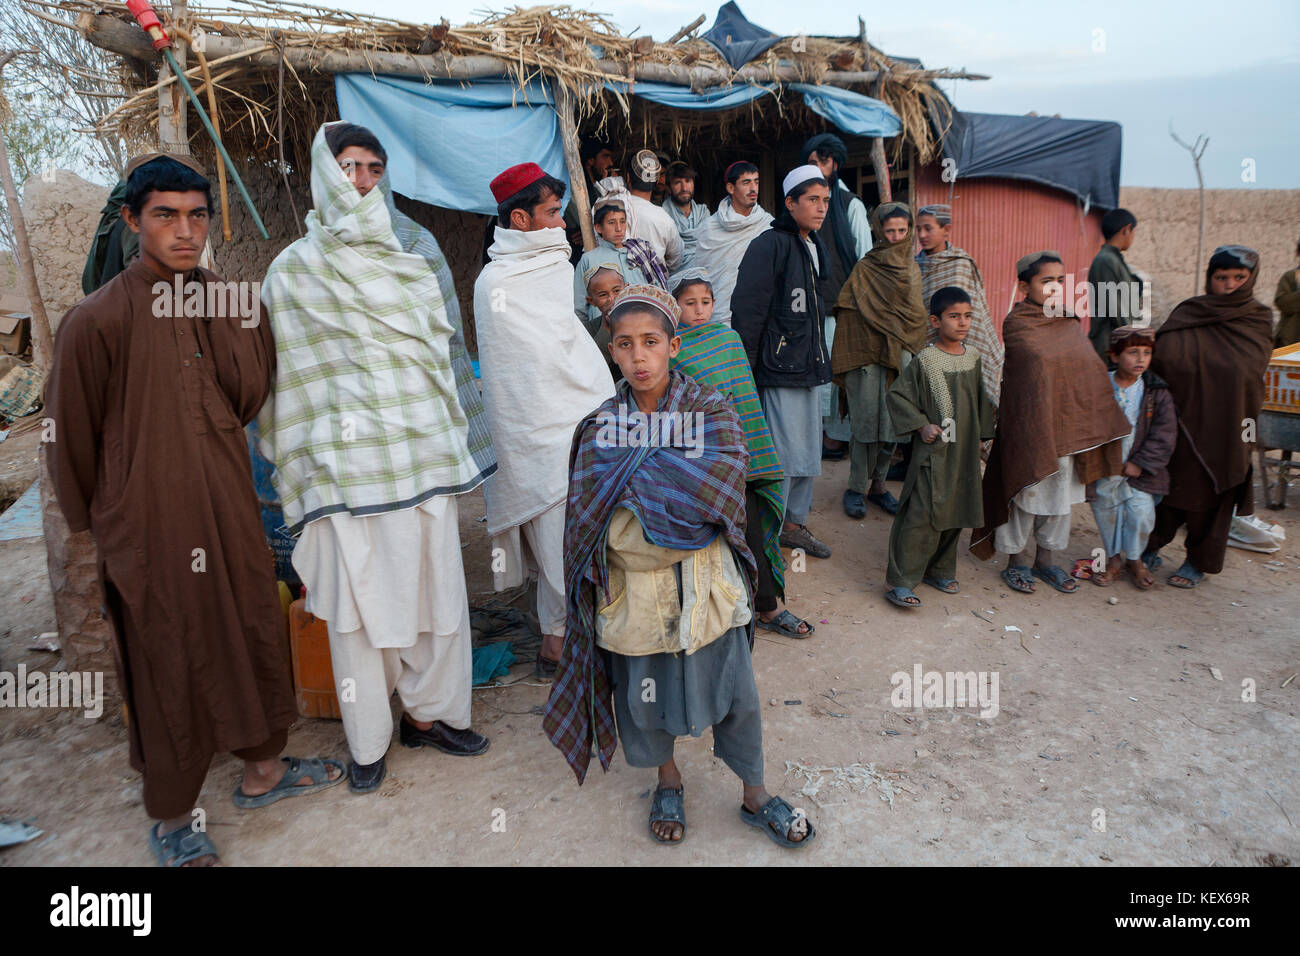 Afghan Men and Boys stan outside a stall on a dusty street in Helmand Province, Afghanistan Stock Photo